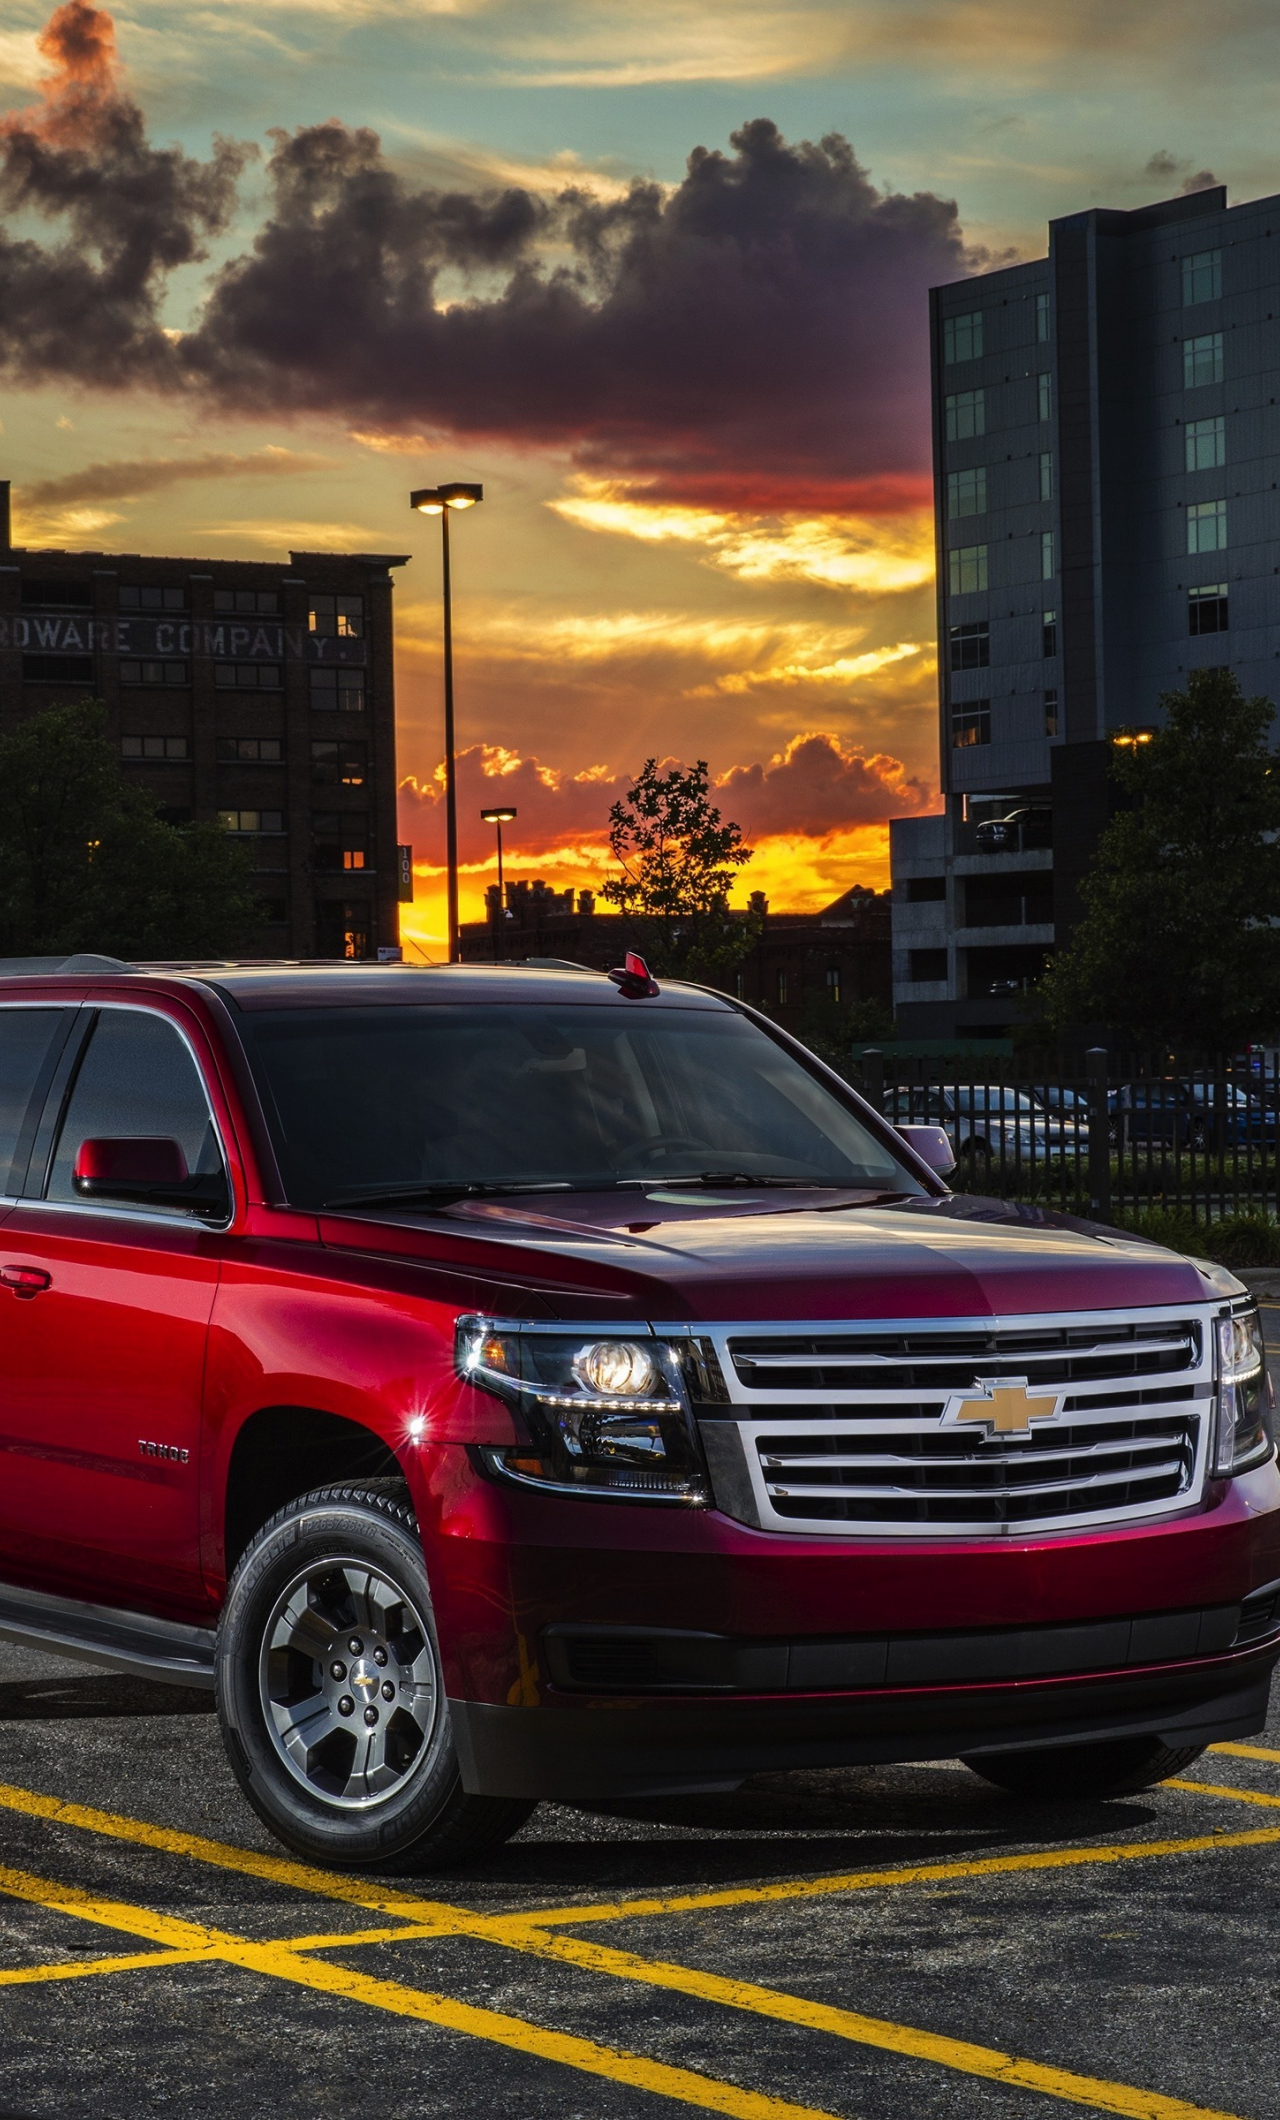 Download red, suv, chevrolet tahoe, front 1280x2120 wallpaper, iphone 6 plus, 1280x2120 HD image, background, 2788